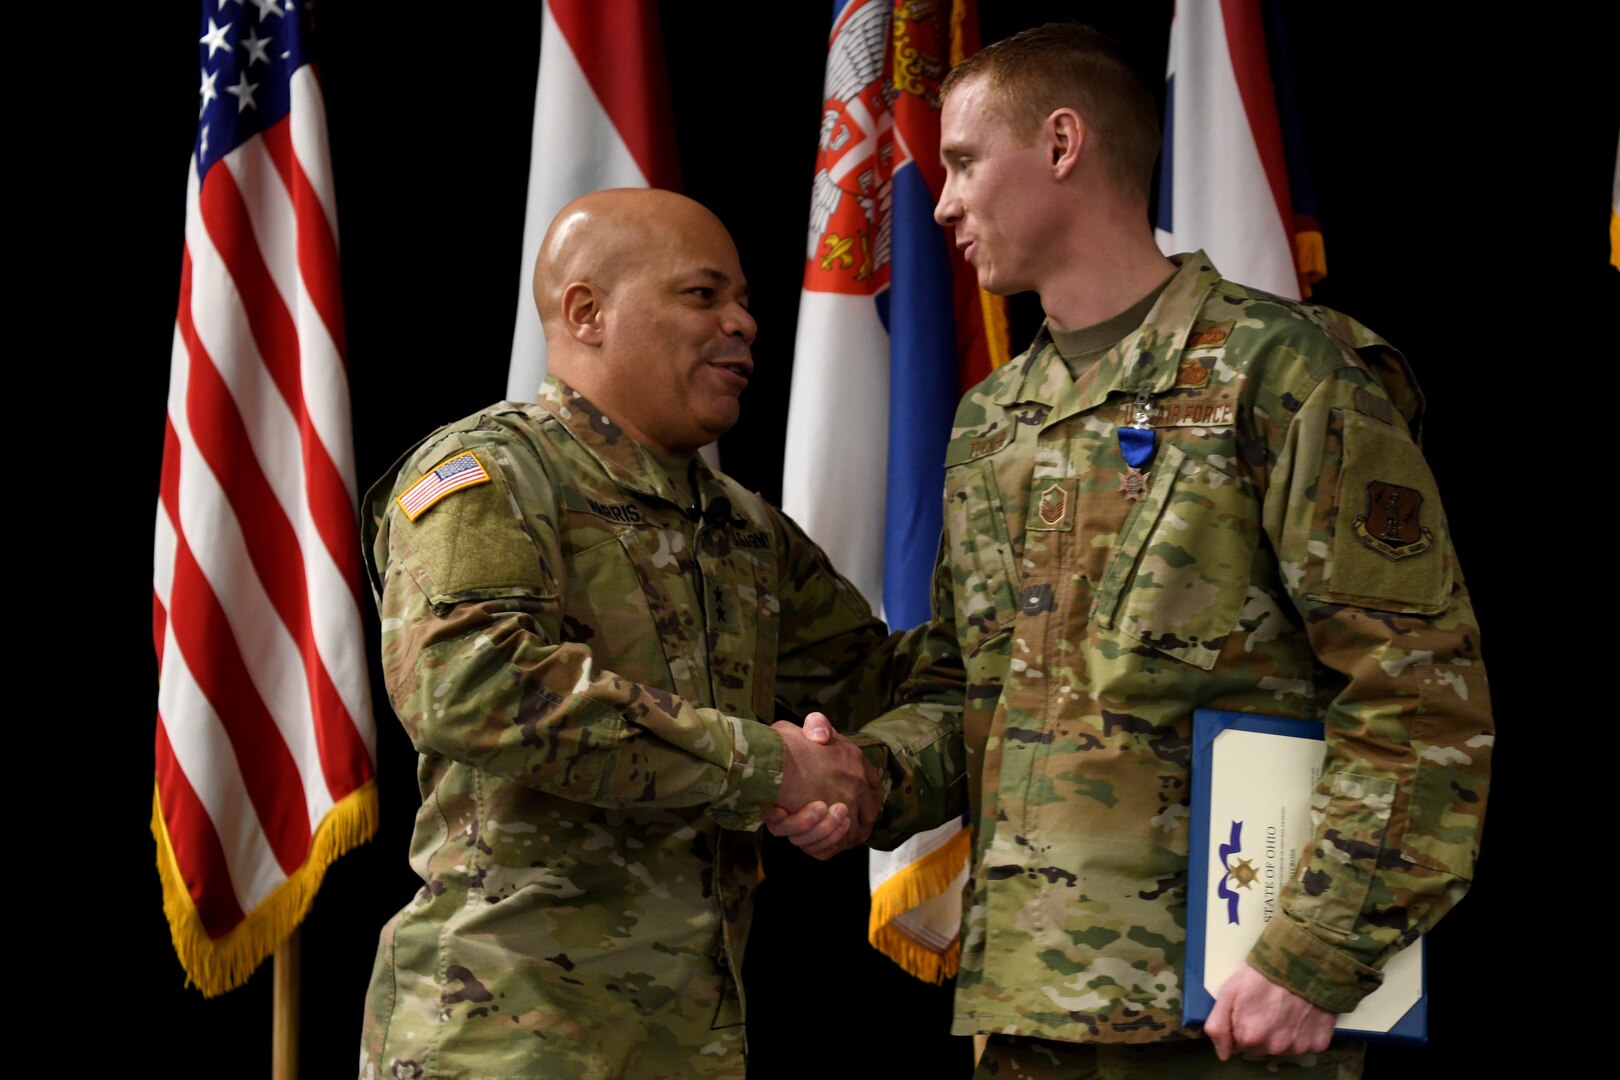 U.S. Army Maj. Gen. John C. Harris, the Ohio Adjutant General, congratulates U.S. Air Force Master Sgt. Ryan Tucker after Lt. Gov. Jon Husted awarded Tucker the Ohio Cross at the Ohio National Guard’s Joint Senior Leaders Conference Feb. 14, 2020, in Columbus, Ohio. The Ohio Cross is awarded to any member of the state military forces who distinguishes themselves by gallantry and intrepidity at the risk of their life.